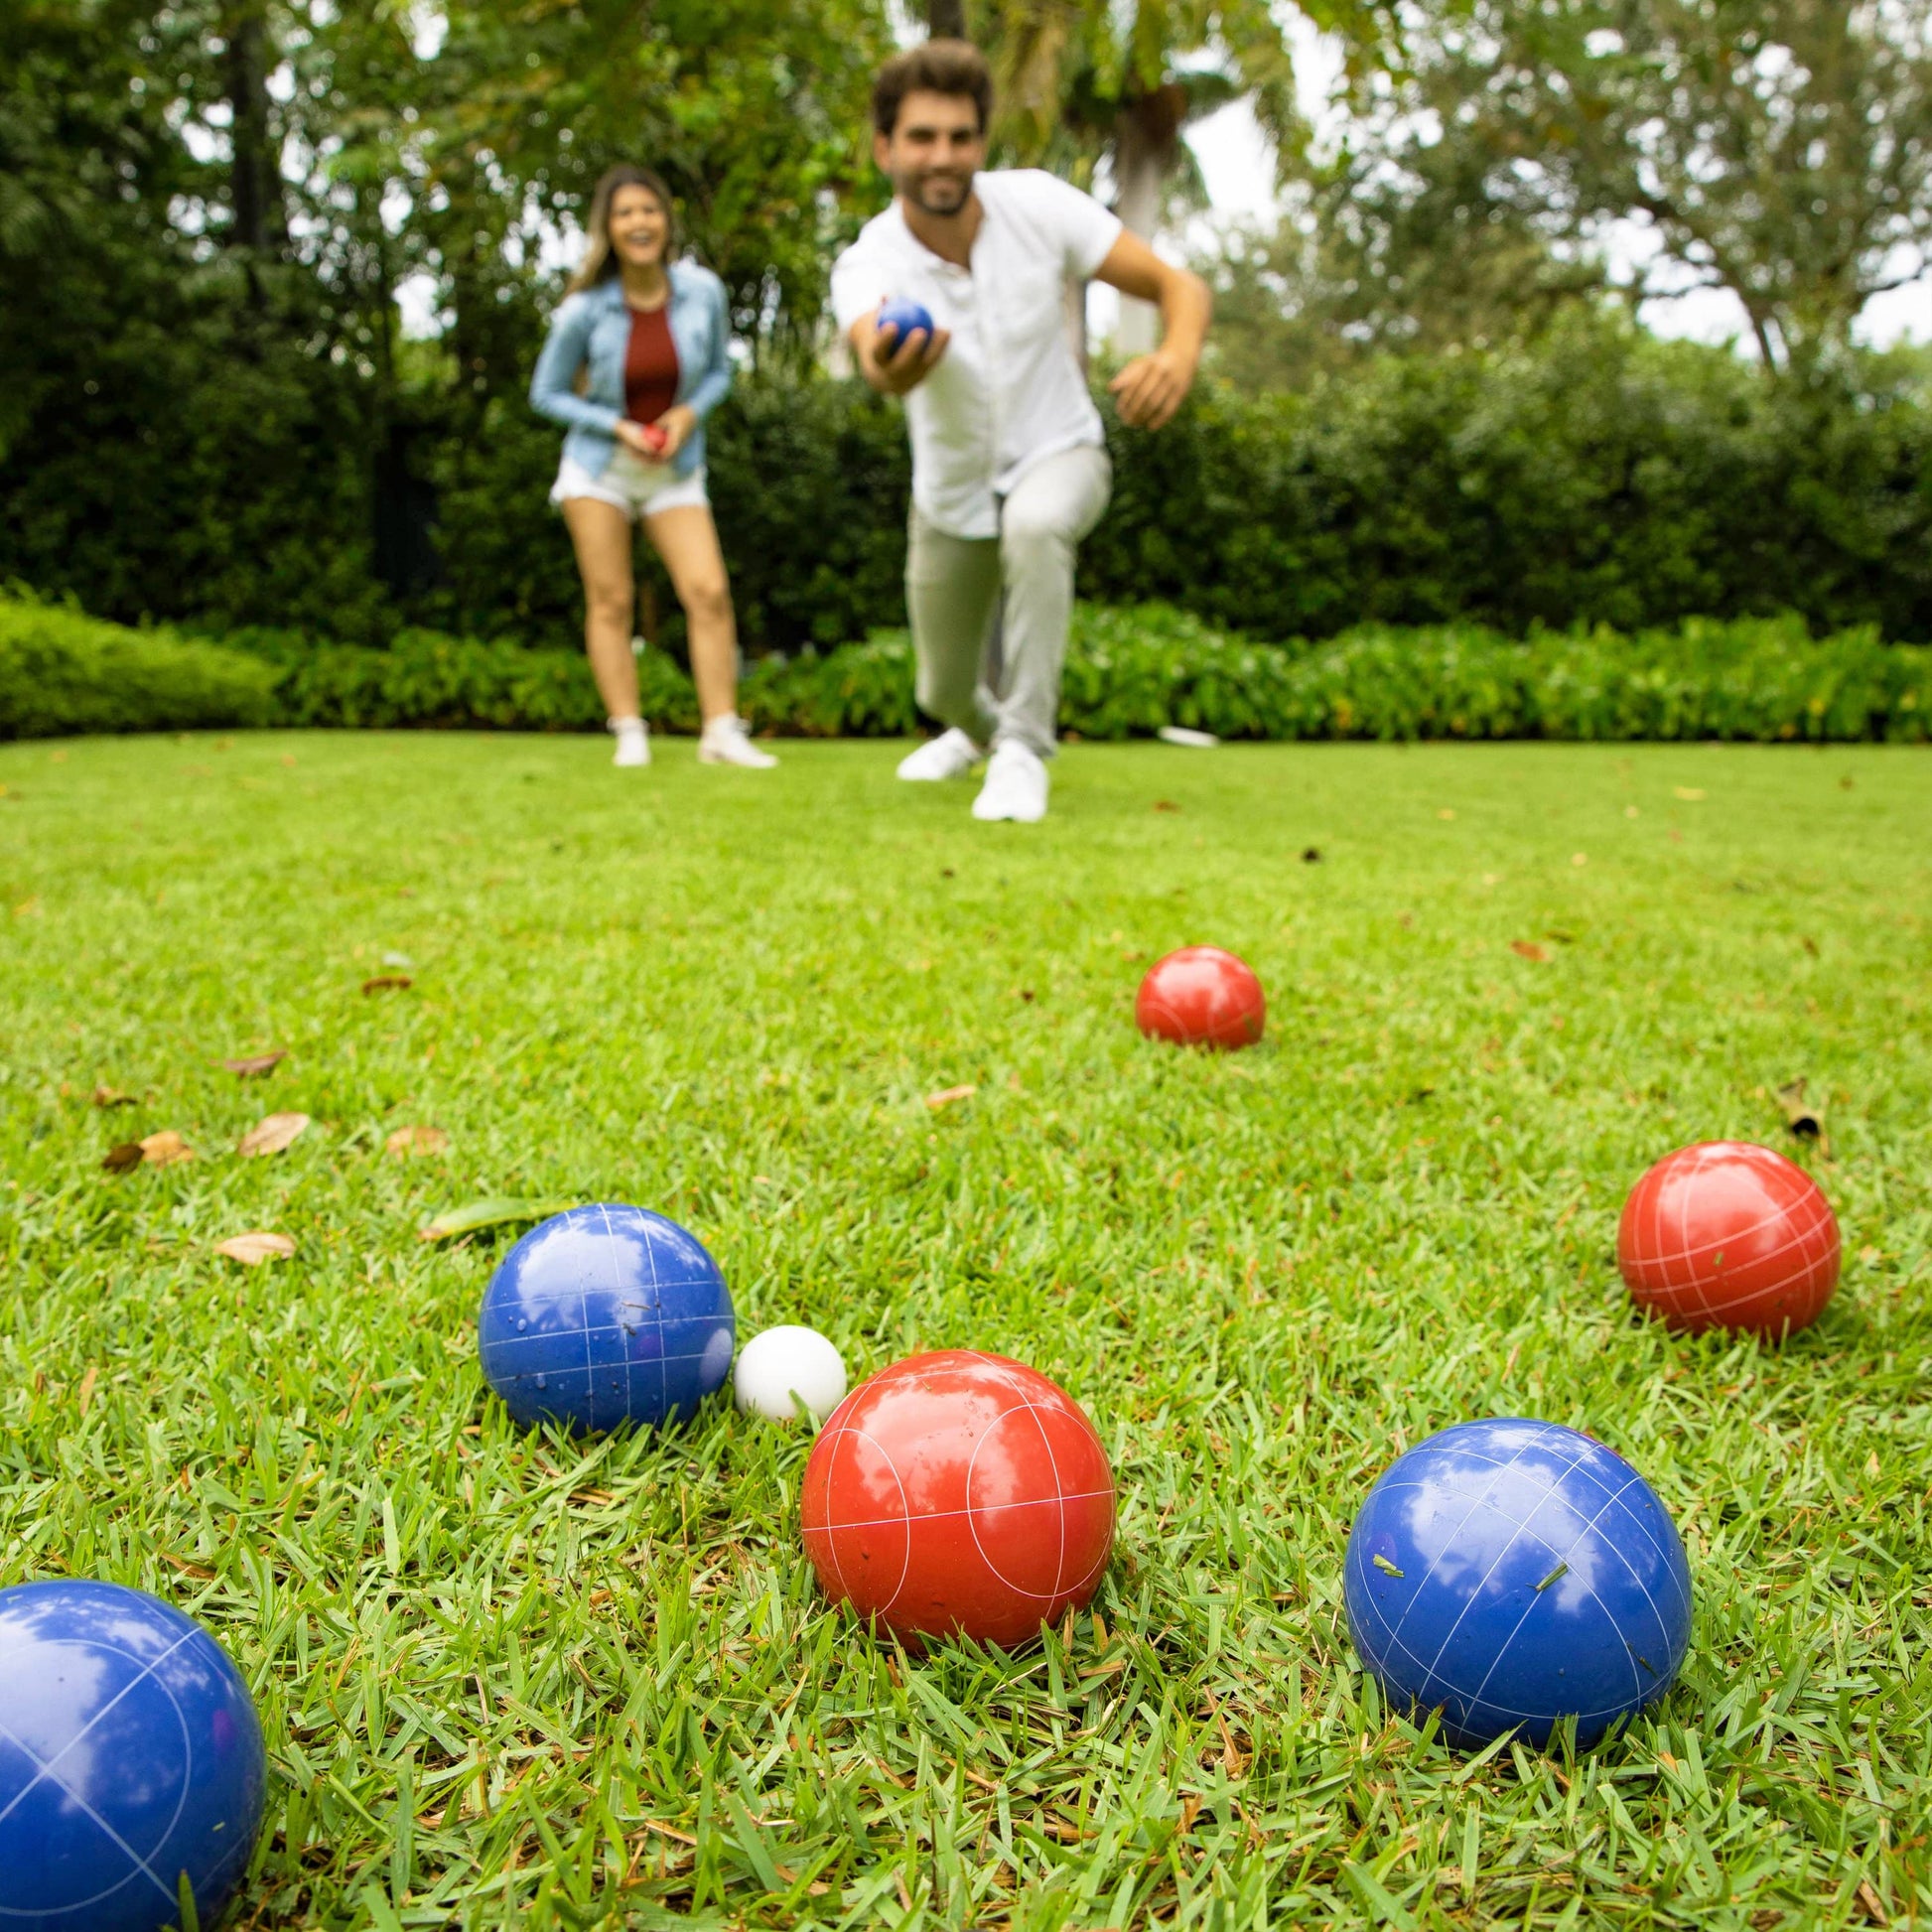 Relaxdays Boccia Game 6 Petanque Balls in 3 Colours Plastic with Target  Ball & Carry Basket Boule Set for Kids Colourful